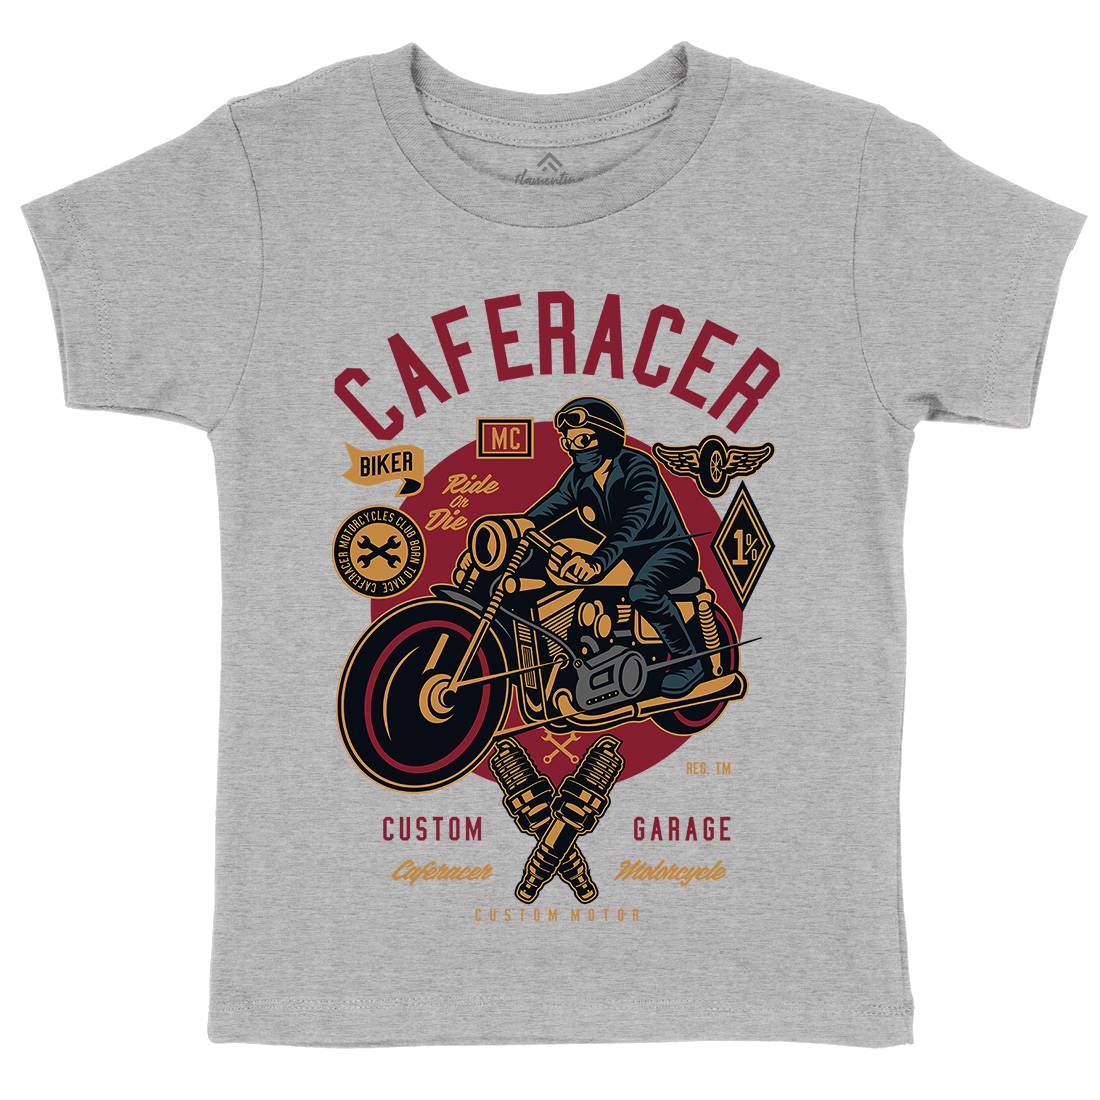 Caferacer Kids Crew Neck T-Shirt Motorcycles D513